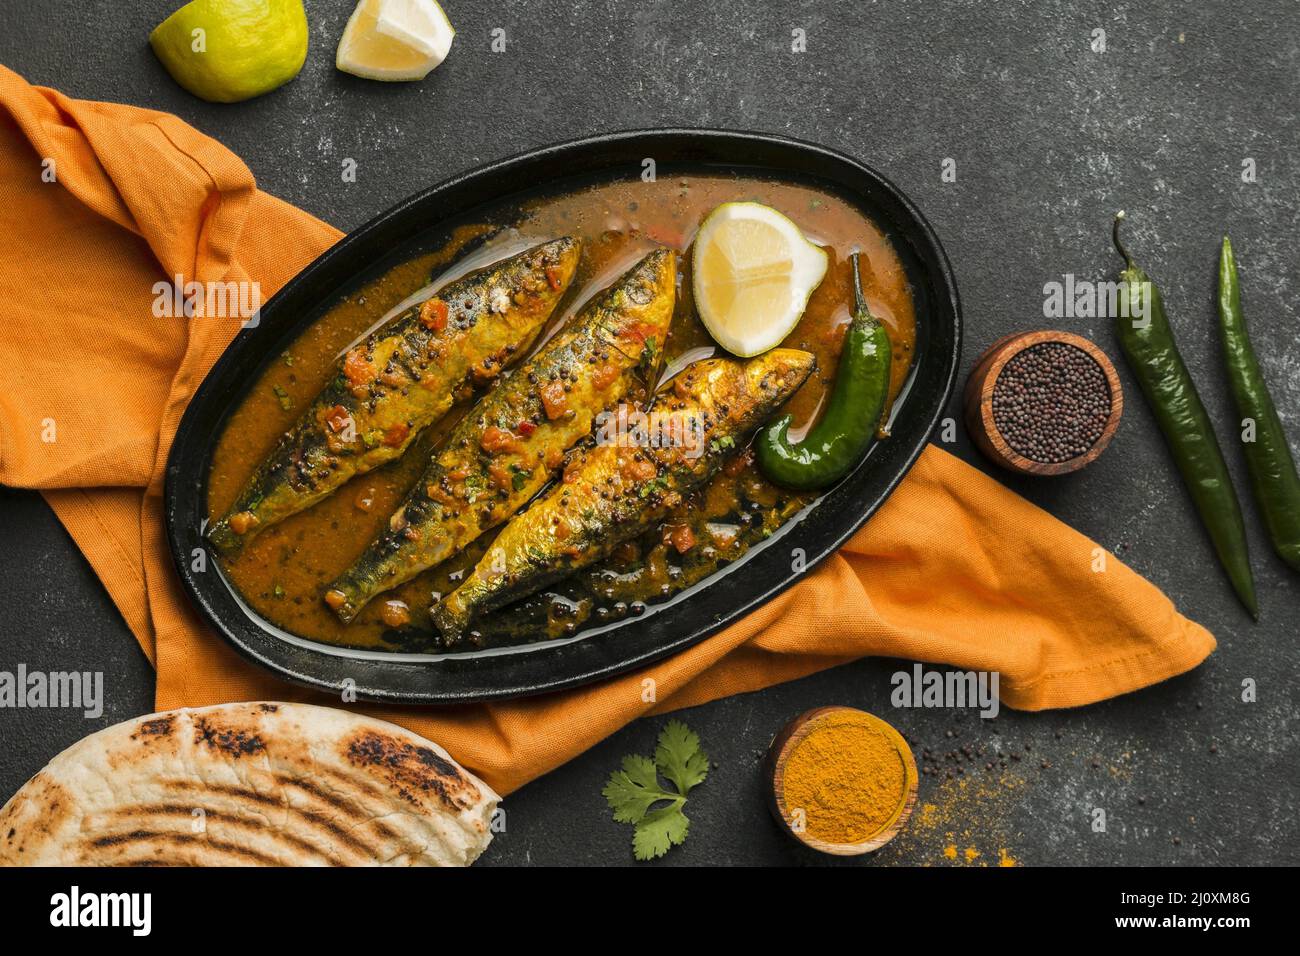 Top view delicious fish meal tray. High quality photo Stock Photo